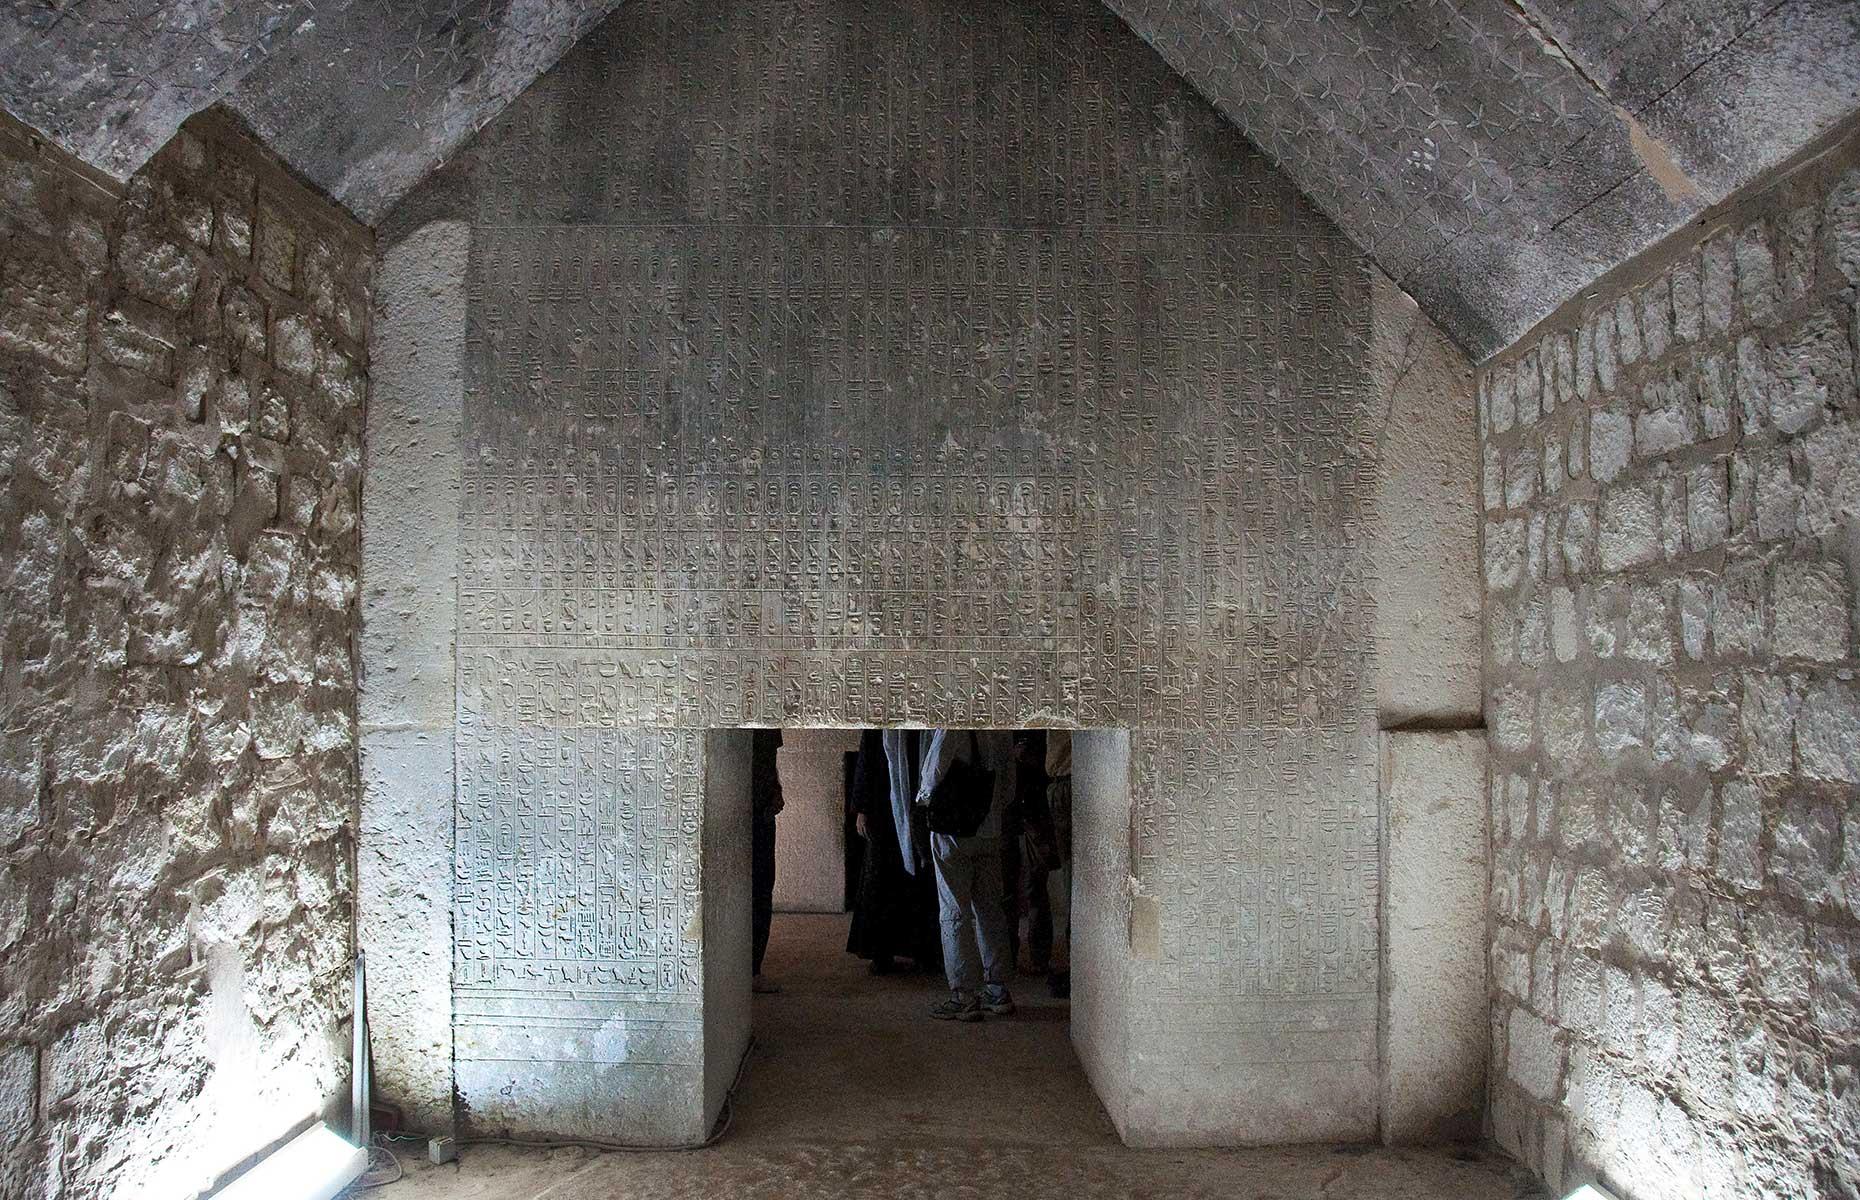 <p>Teti's burial chamber was located beneath the pyramid, along with his well-preserved basalt sarcophagus. Like the Unas Pyramid, the Teti Pyramid's walls were also adorned with pyramid texts. These funerary texts first appeared in the 5th dynasty of the Old Kingdom (2465-2323 BC), and were succeeded by so-called 'coffin texts' during the Middle Kingdom (inscriptions found inside sarcophagi that tended to focus on the underworld). Both went on to influence the New Kingdom's Book of the Dead.</p>  <p><a href="https://www.loveexploring.com/galleries/77693/grave-travel-where-your-favourite-stars-are-laid-to-rest?page=1"><strong>These are where your favourite stars are laid to rest</strong></a></p>